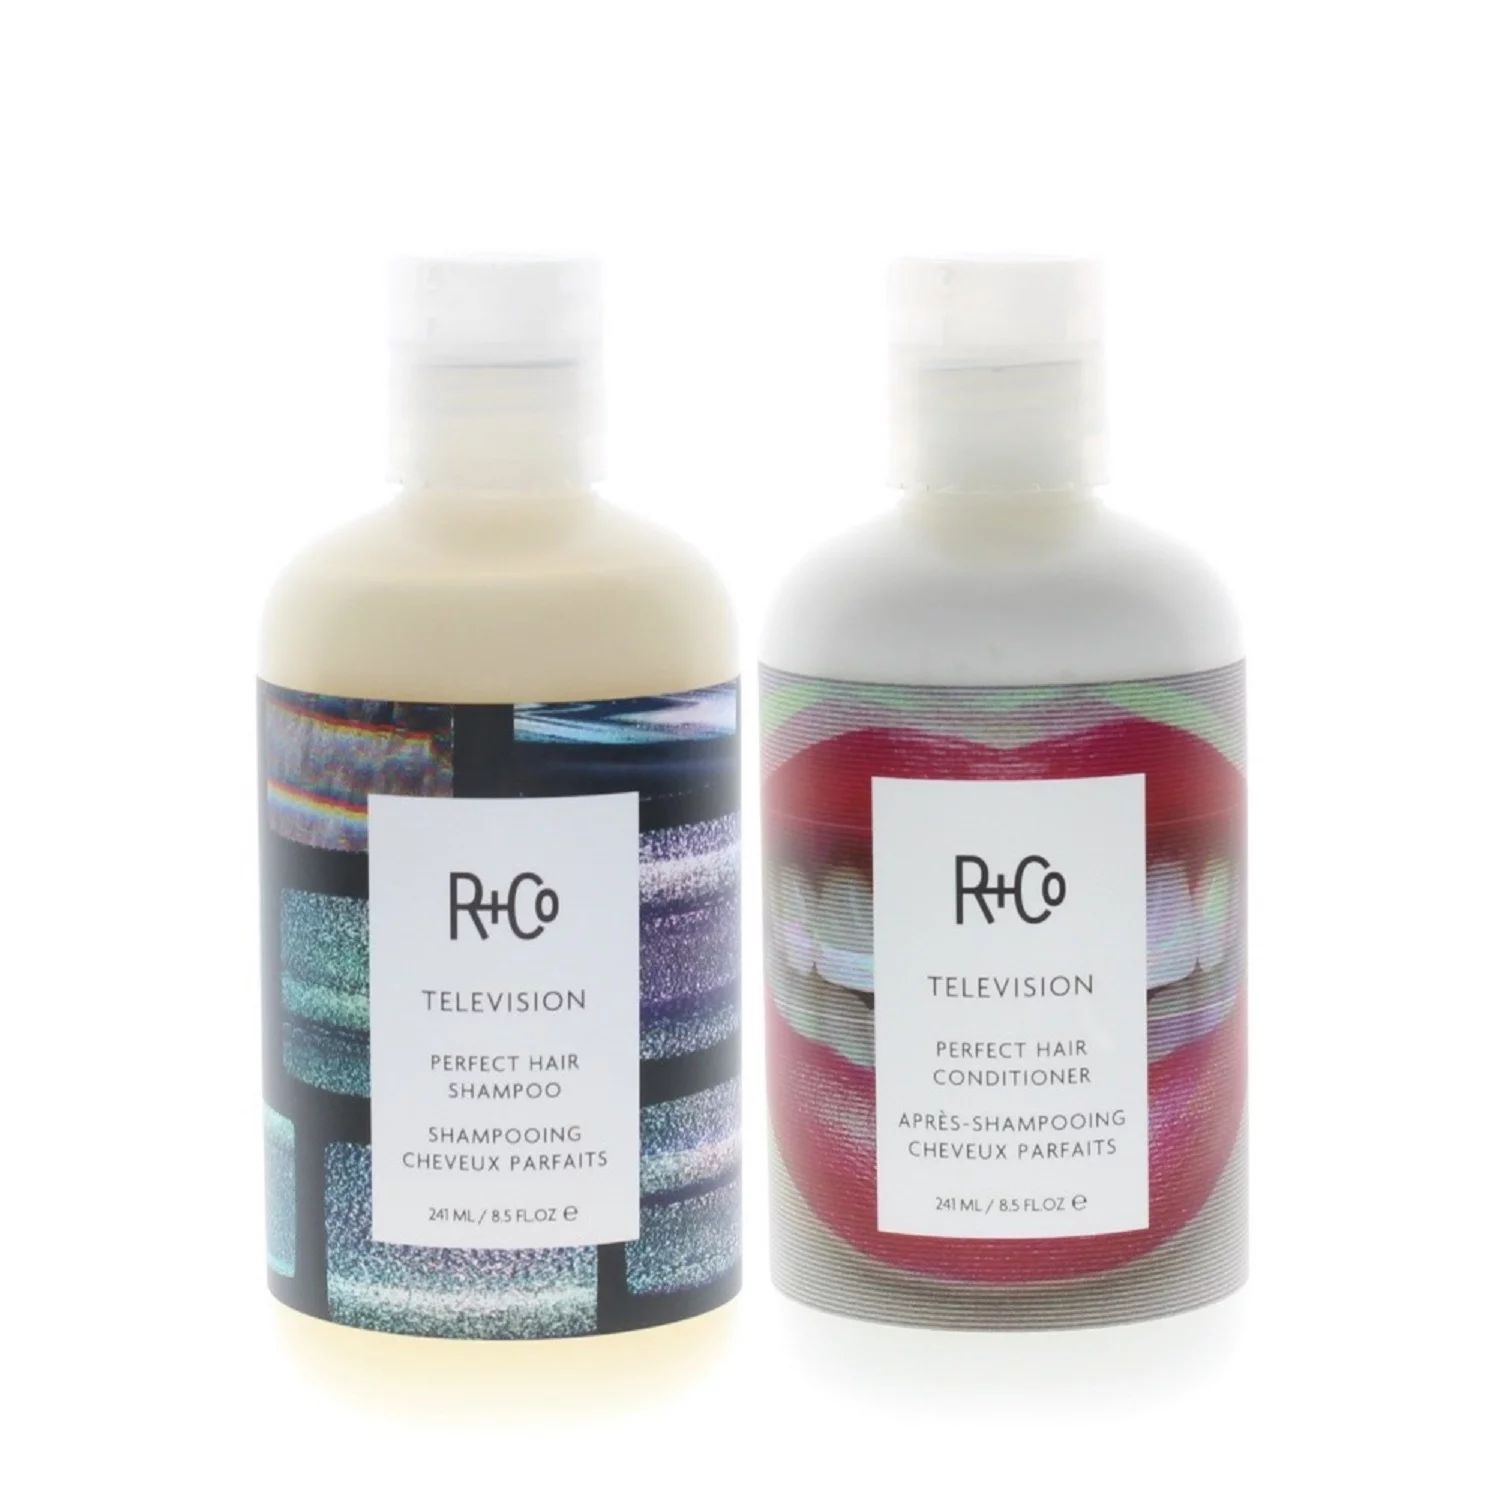 R+Co Television Perfect Hair Shampoo and Conditioner 8.5oz/241ml COMBO | Walmart (US)